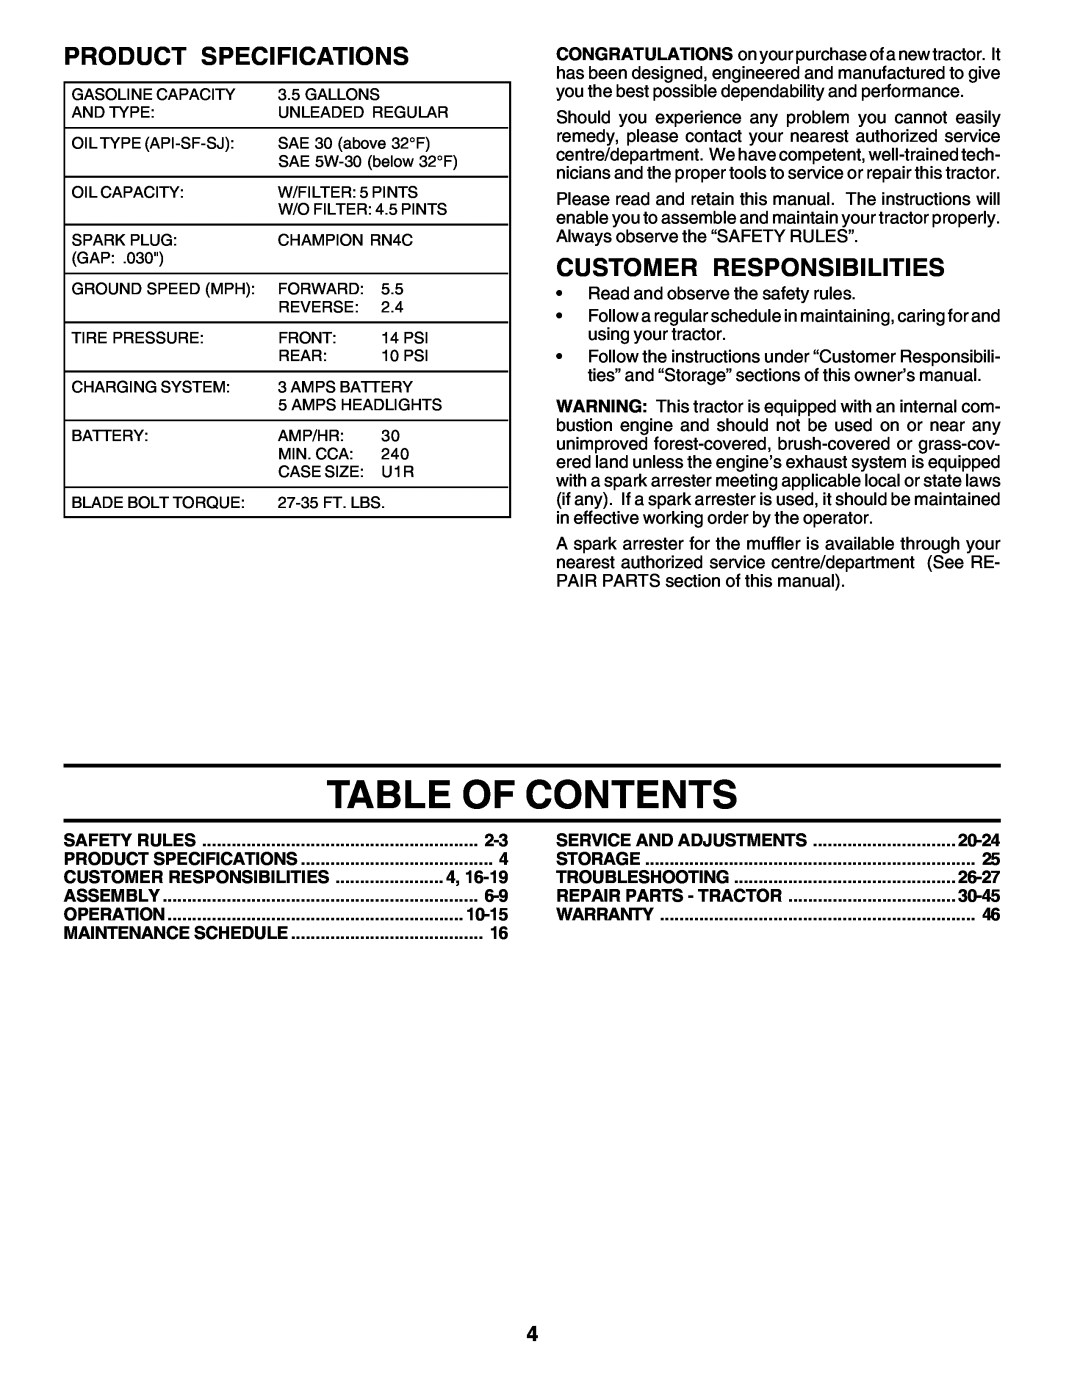 Weed Eater SGT18H46C manual Table Of Contents, Product Specifications, Customer Responsibilities 